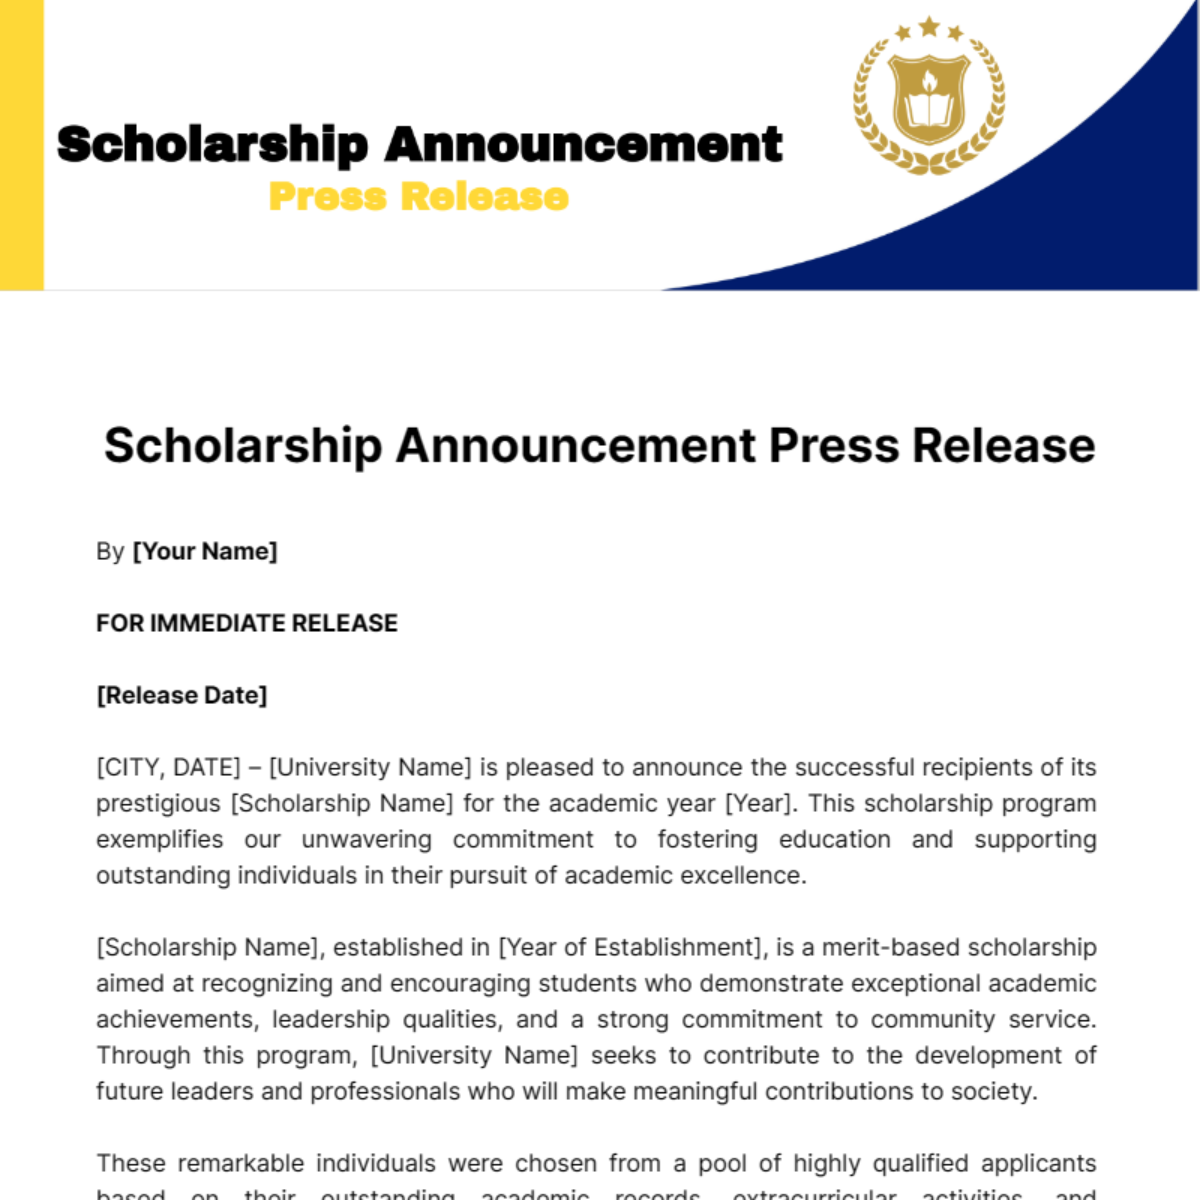 Free Scholarship Announcement Press Release Template